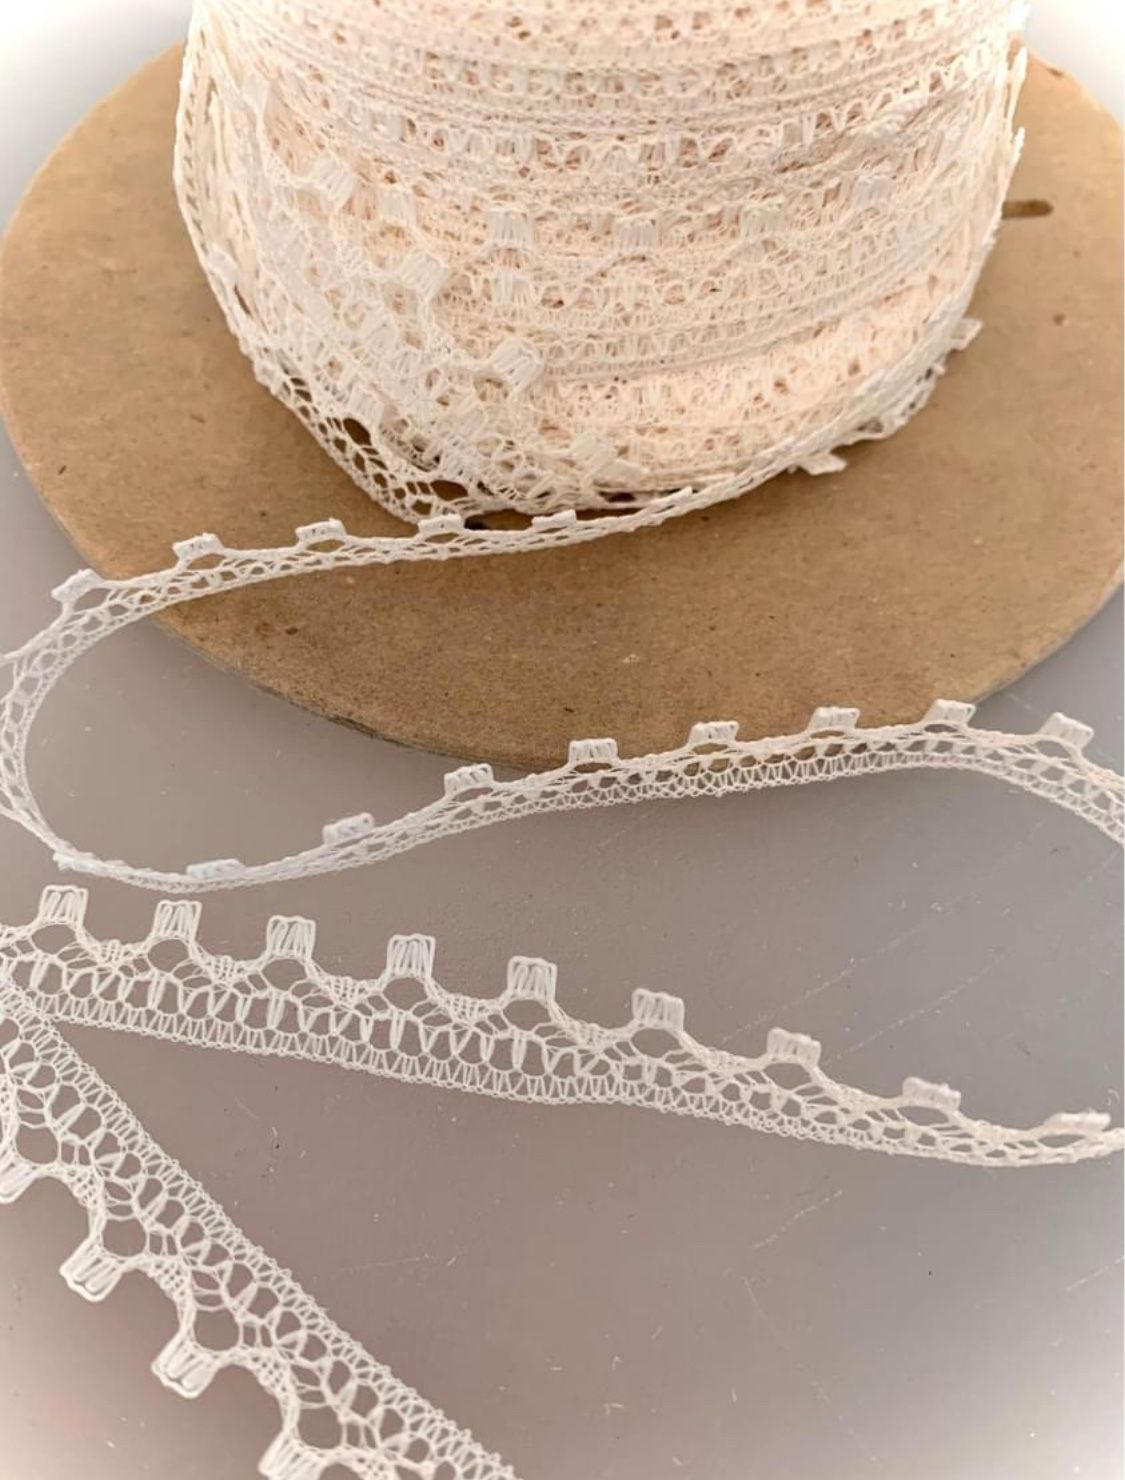 7 yds of 7/16” Very Fine Cream Lace. #013122-6